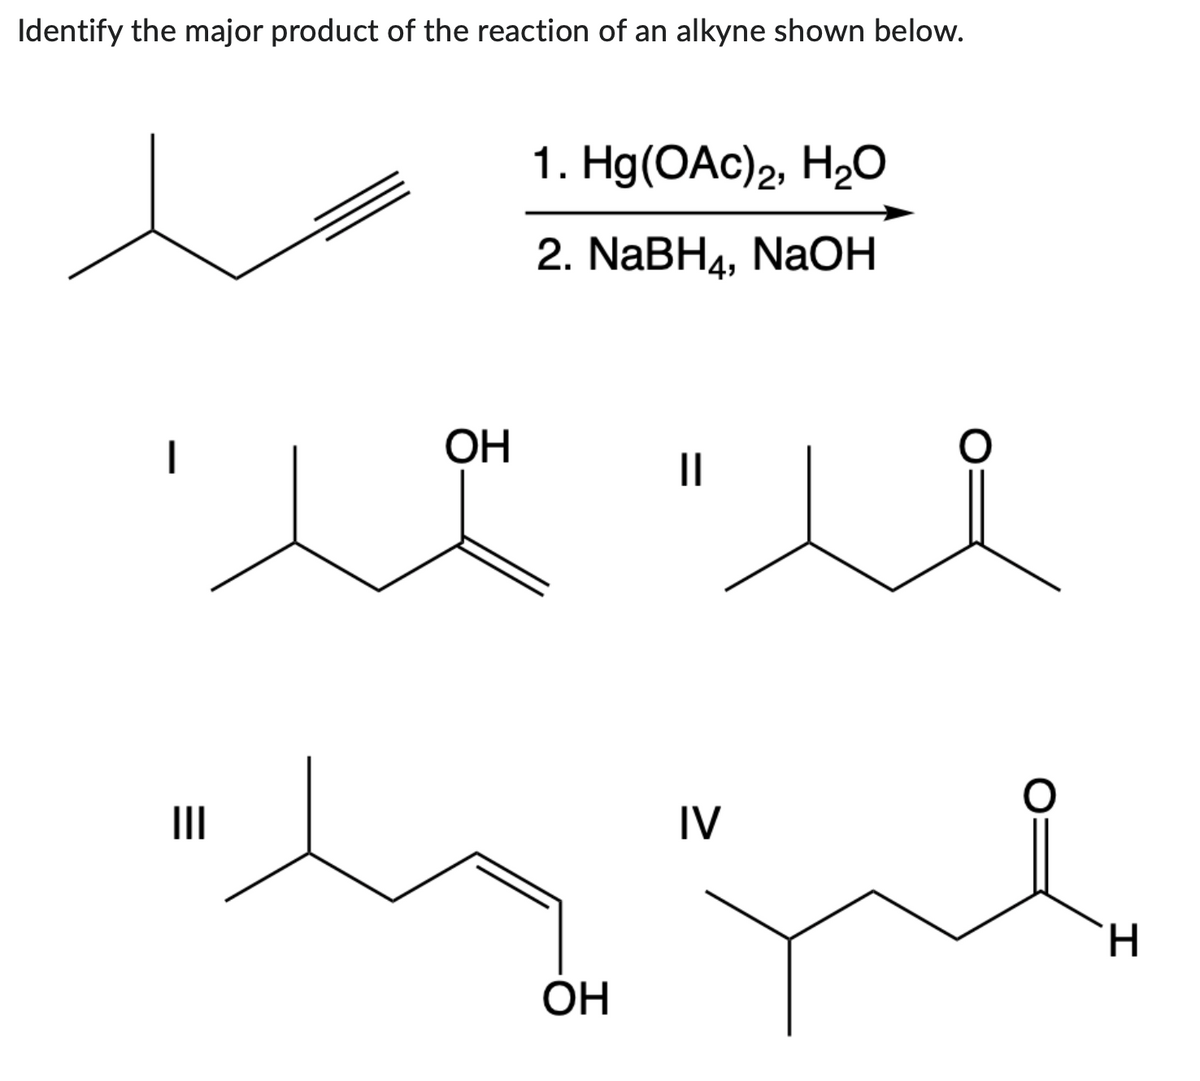 Identify the major product of the reaction of an alkyne shown below.
|
|||
OH
1. Hg(OAc)2, H2O
2. NaBH4, NaOH
ОН
||
IV
。
。
H